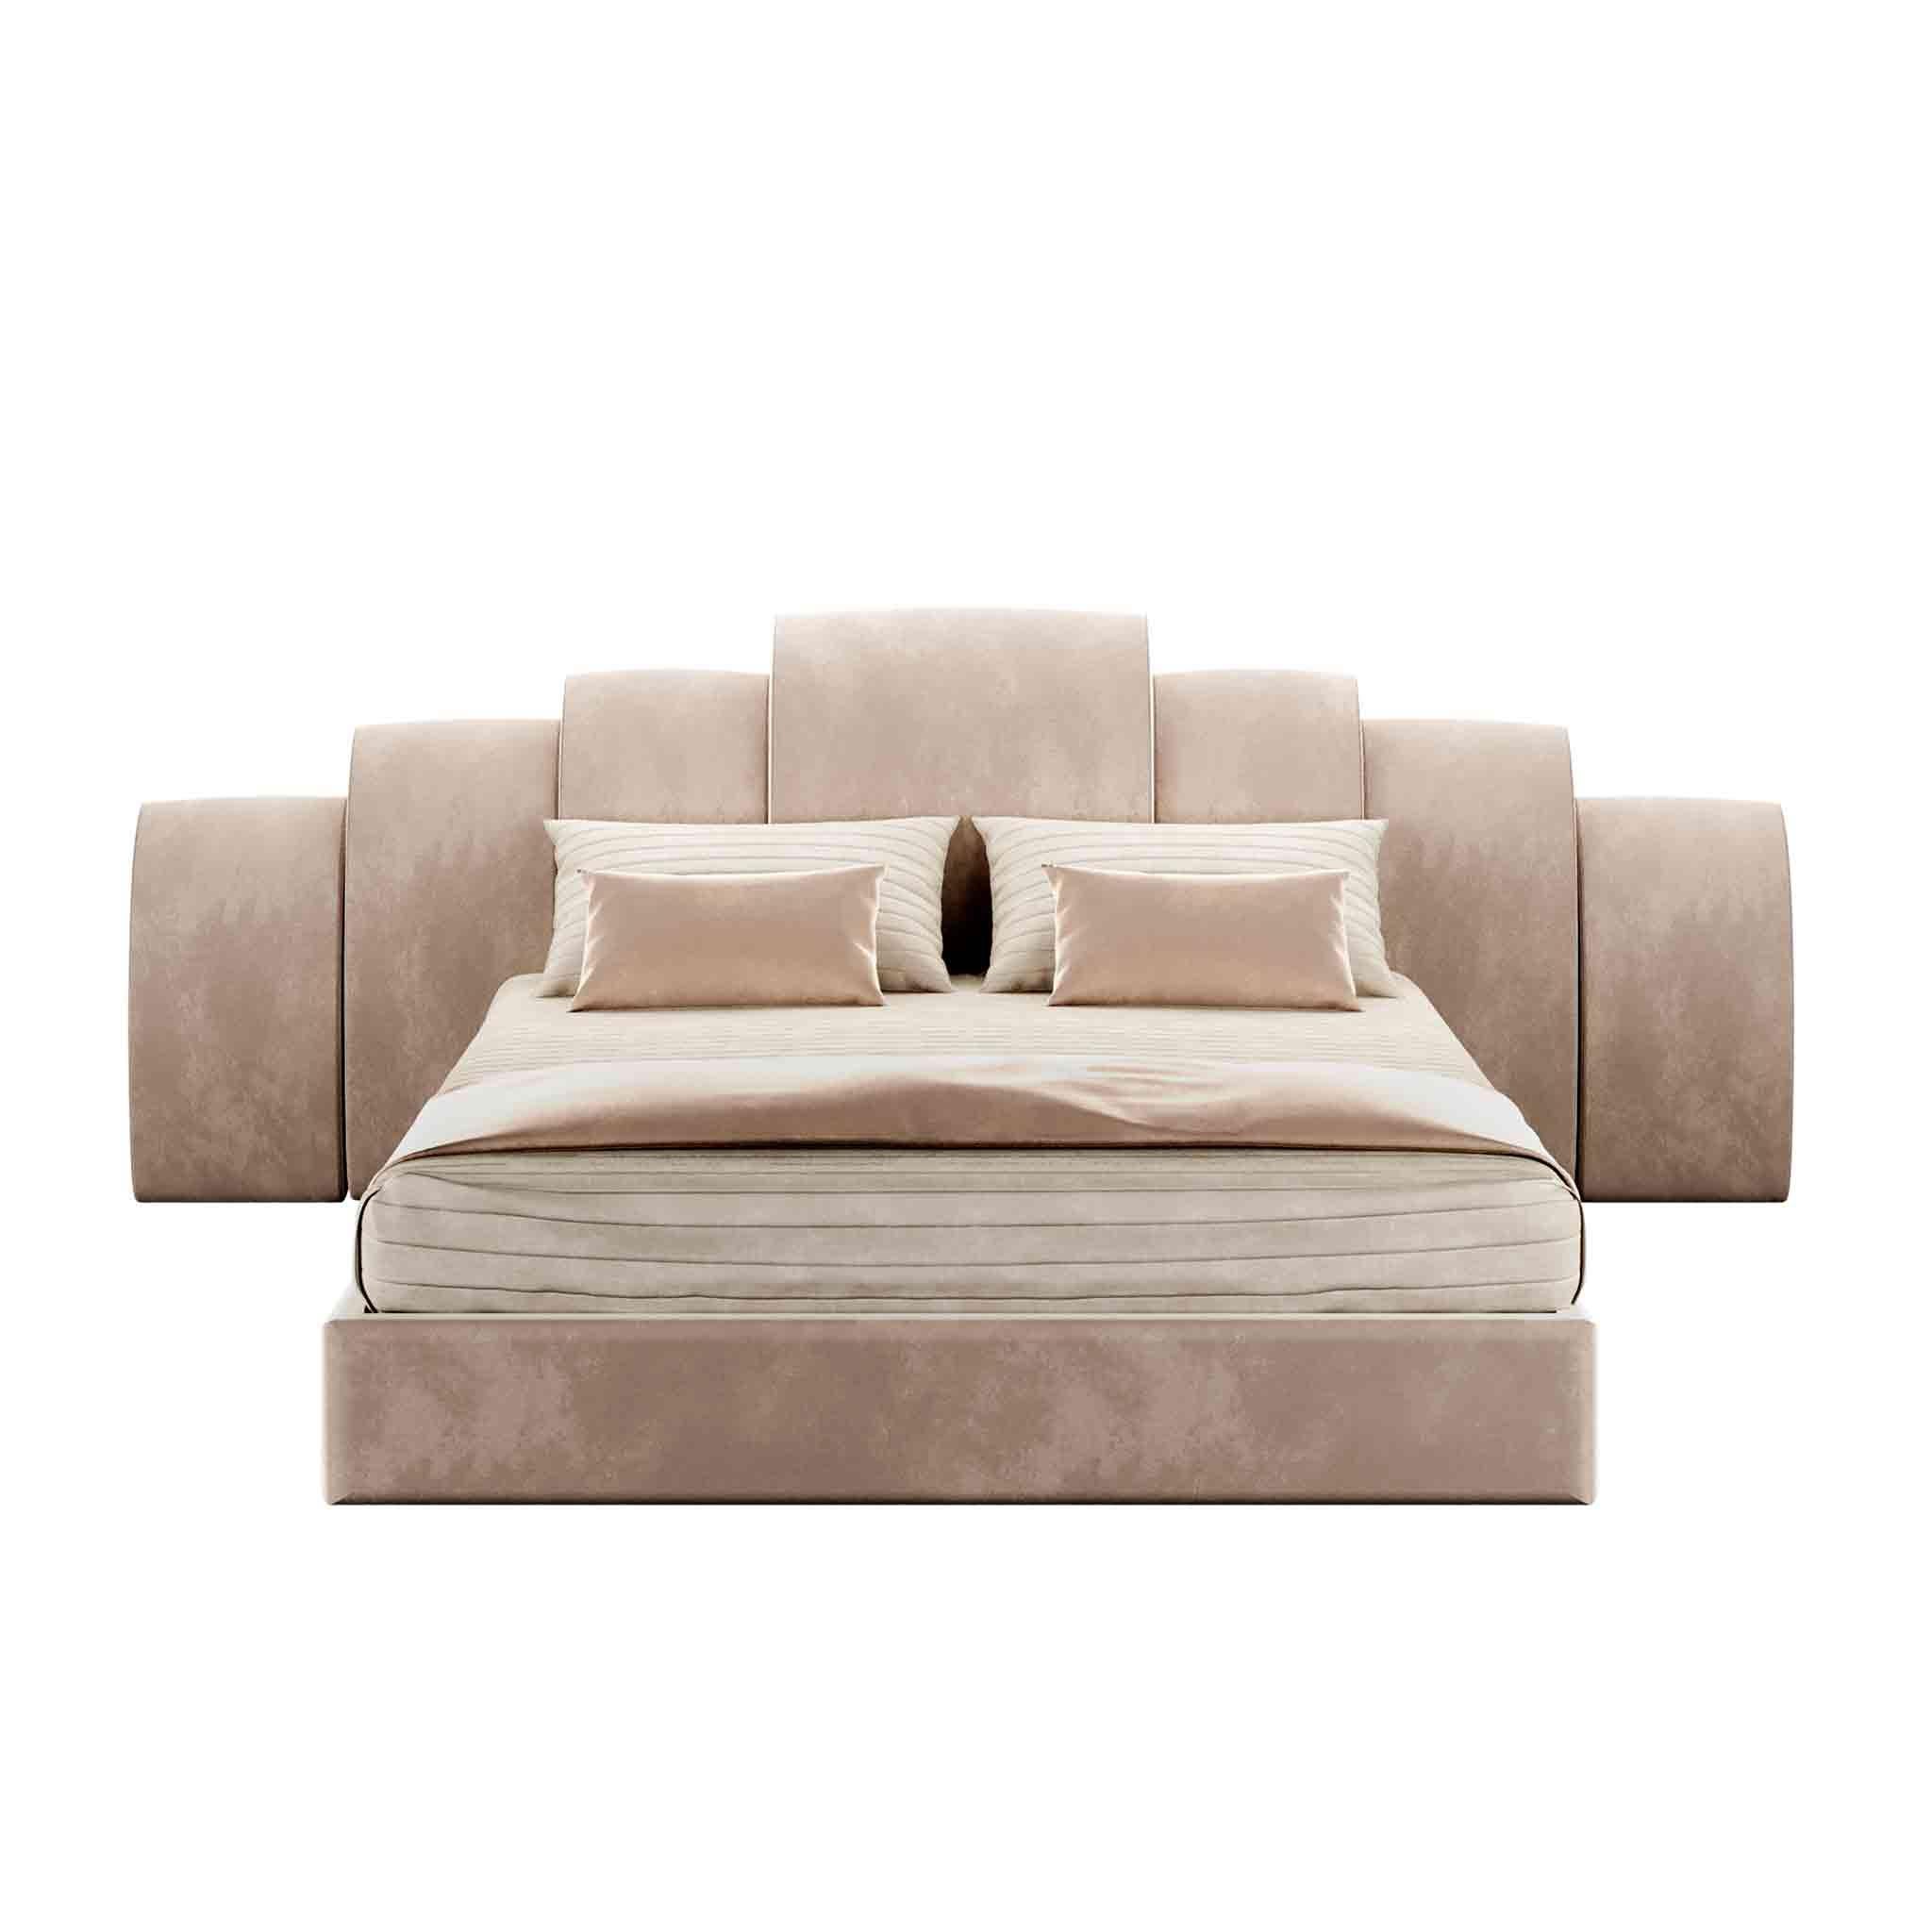 Kara Bed is a luxury design piece that stripped away any superfluous decoration searching for simplicity. A modern bed, upholstered in velvet,  is the best choice for a contemporary master bedroom design project.

Materials: Interior structure in